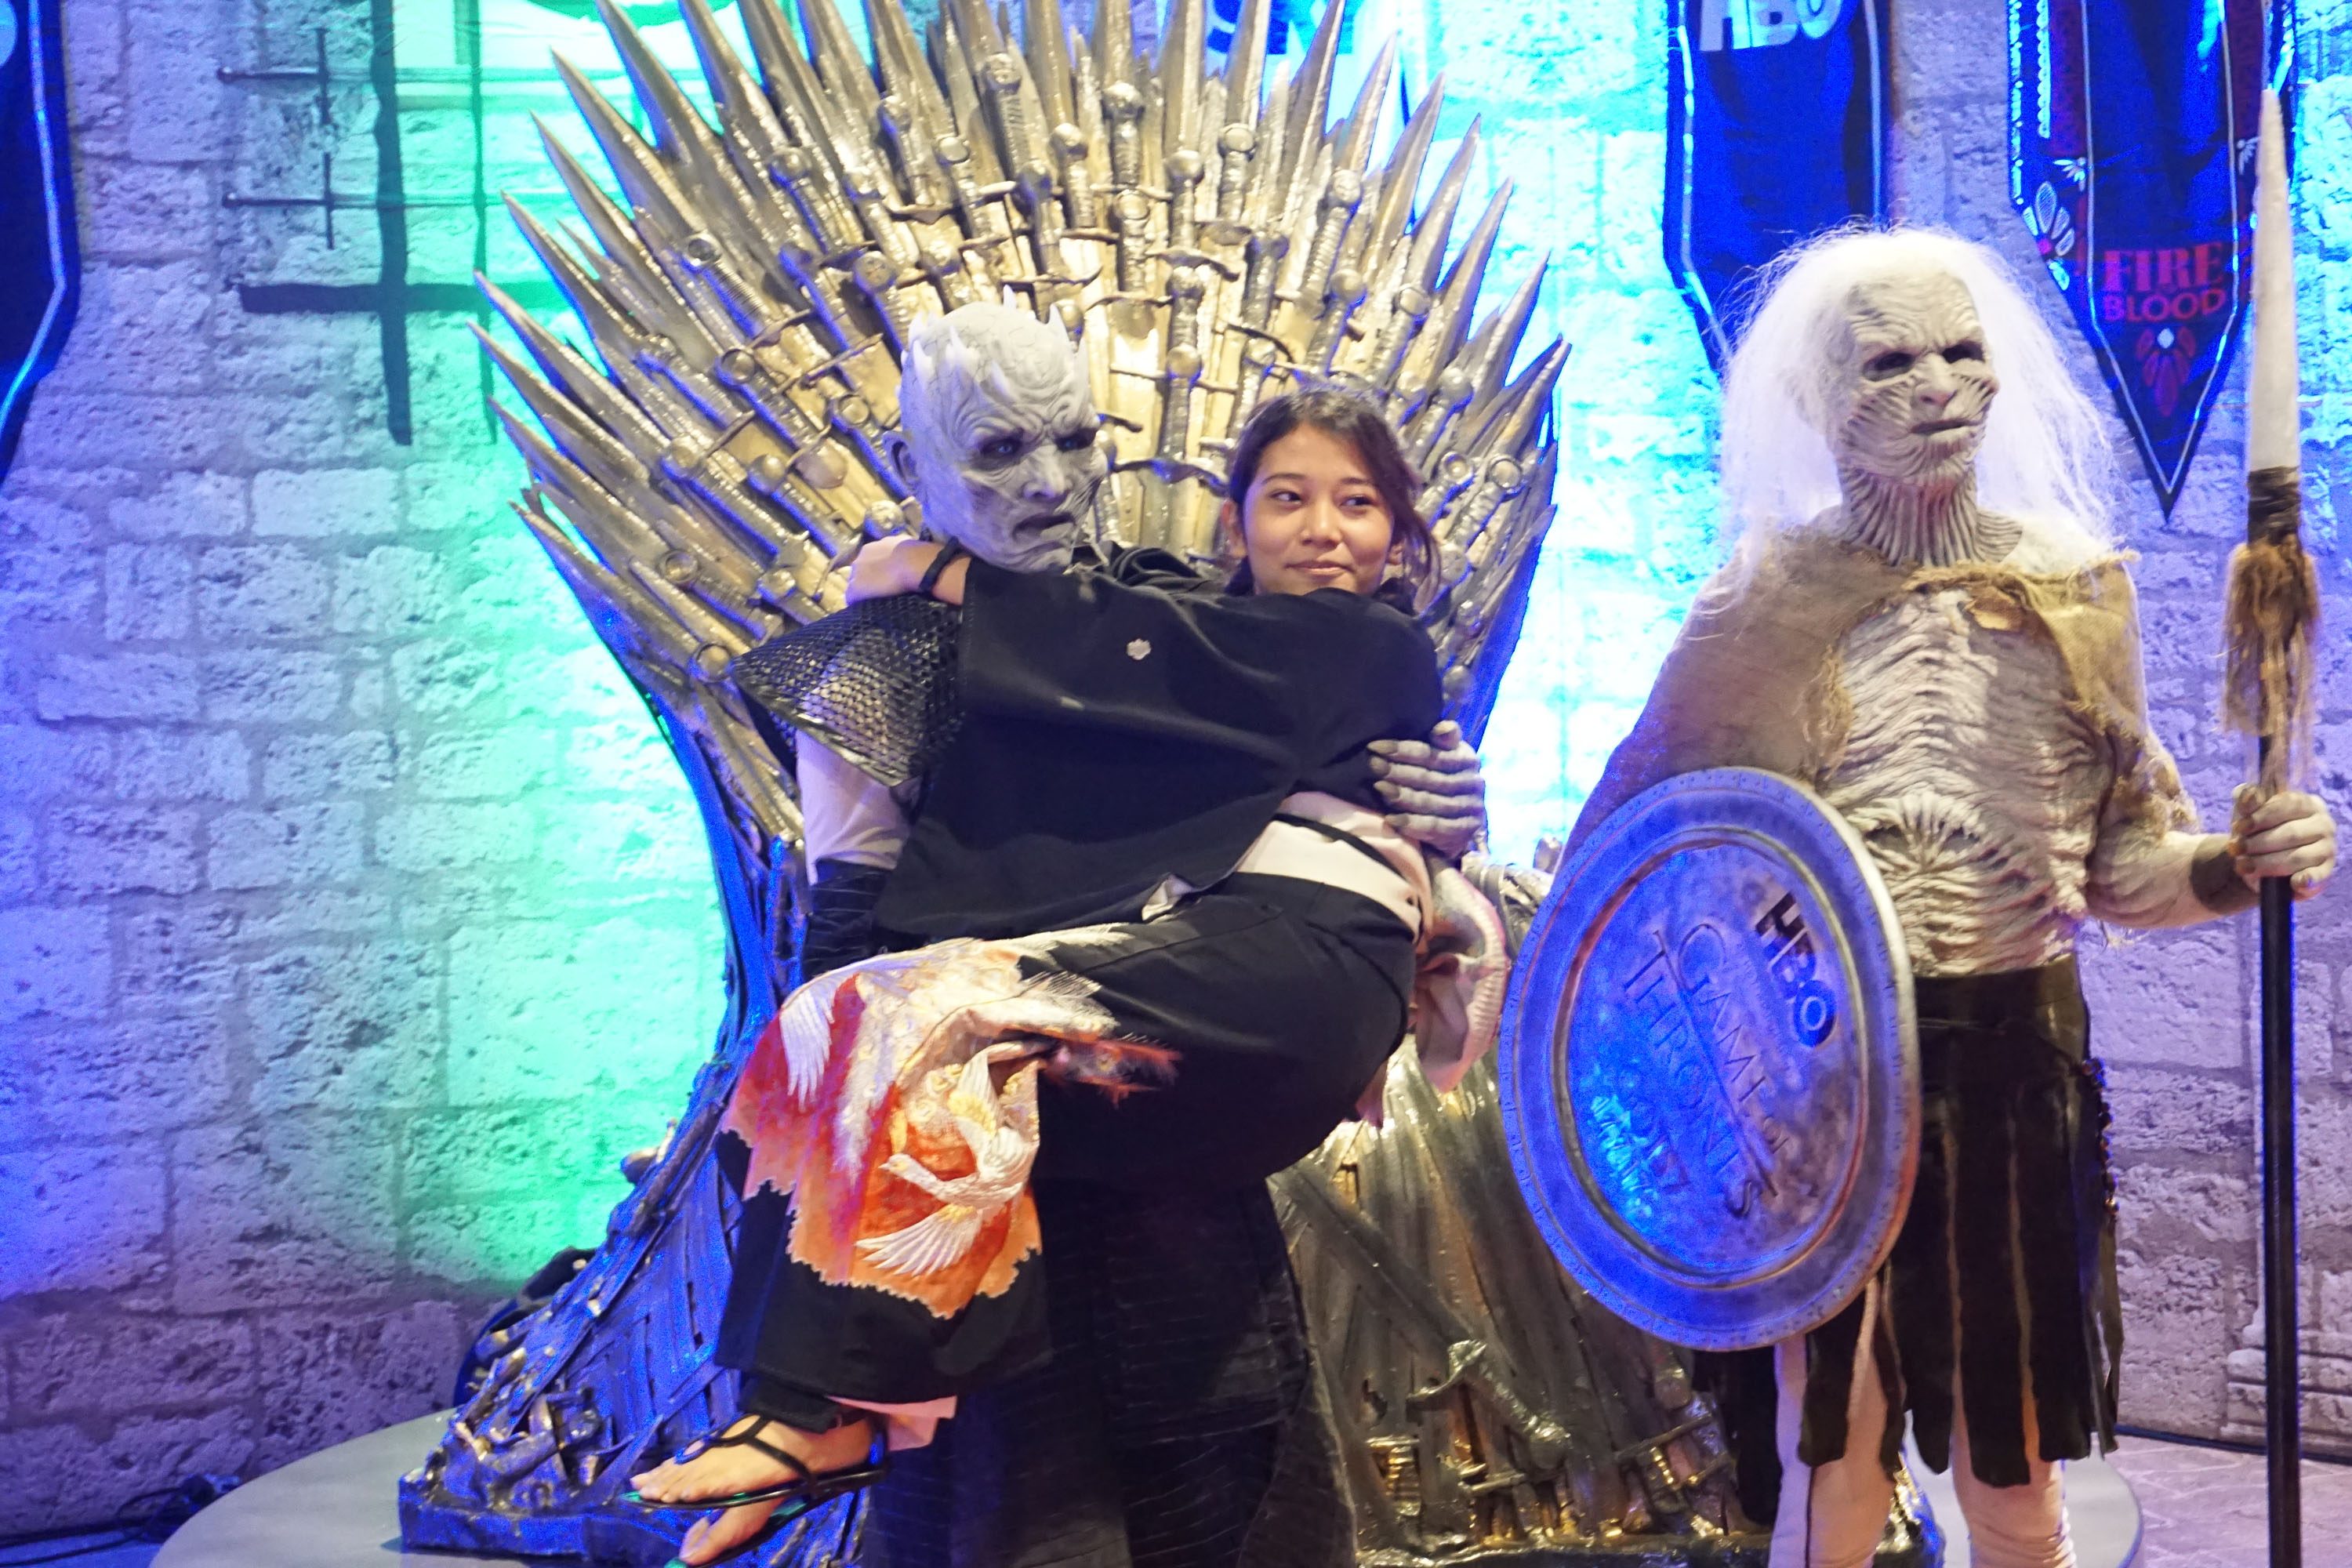 NIGHT KING. At APCC, the Night King graced the Iron Throne photo area to the delight of the fans lining up to take photos.  